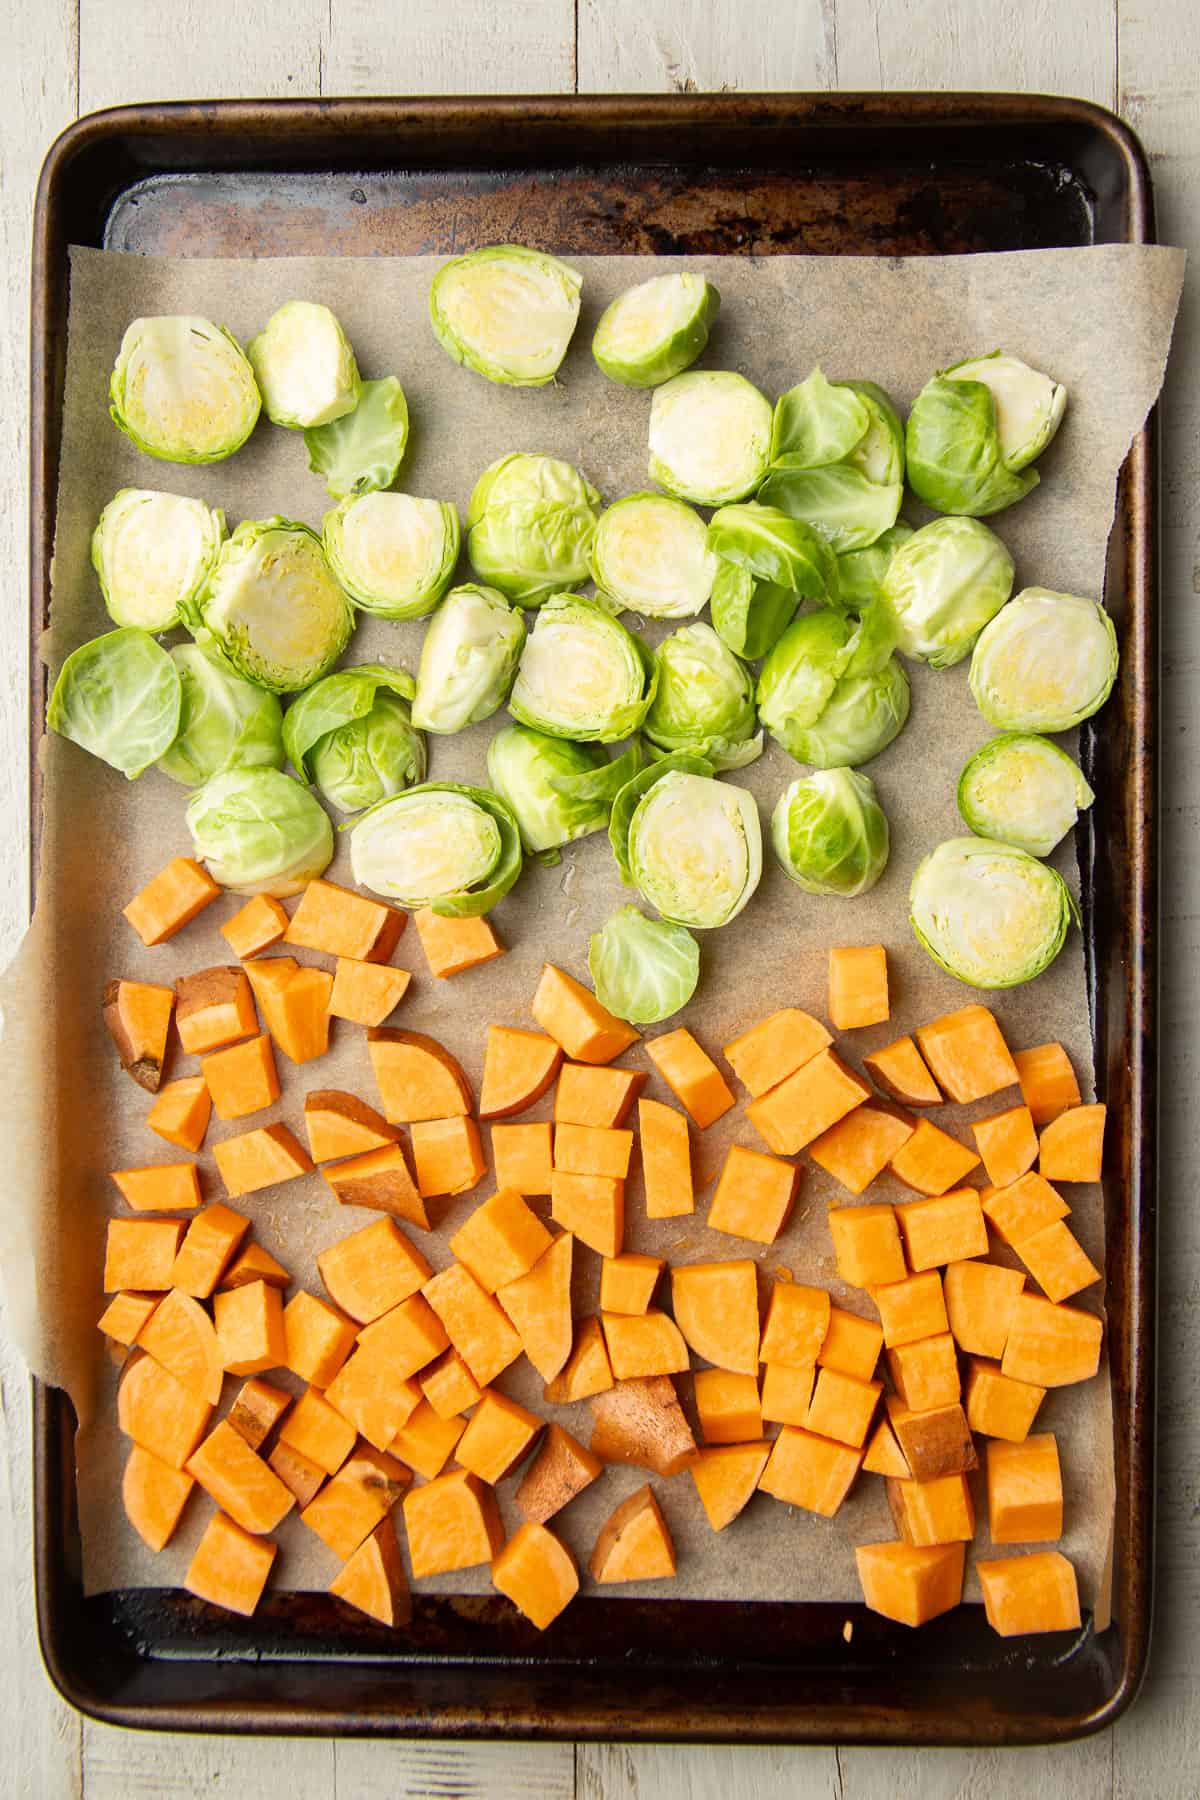 Diced sweet potato and halved Brussels sprouts on a parchment paper-lined baking sheet.